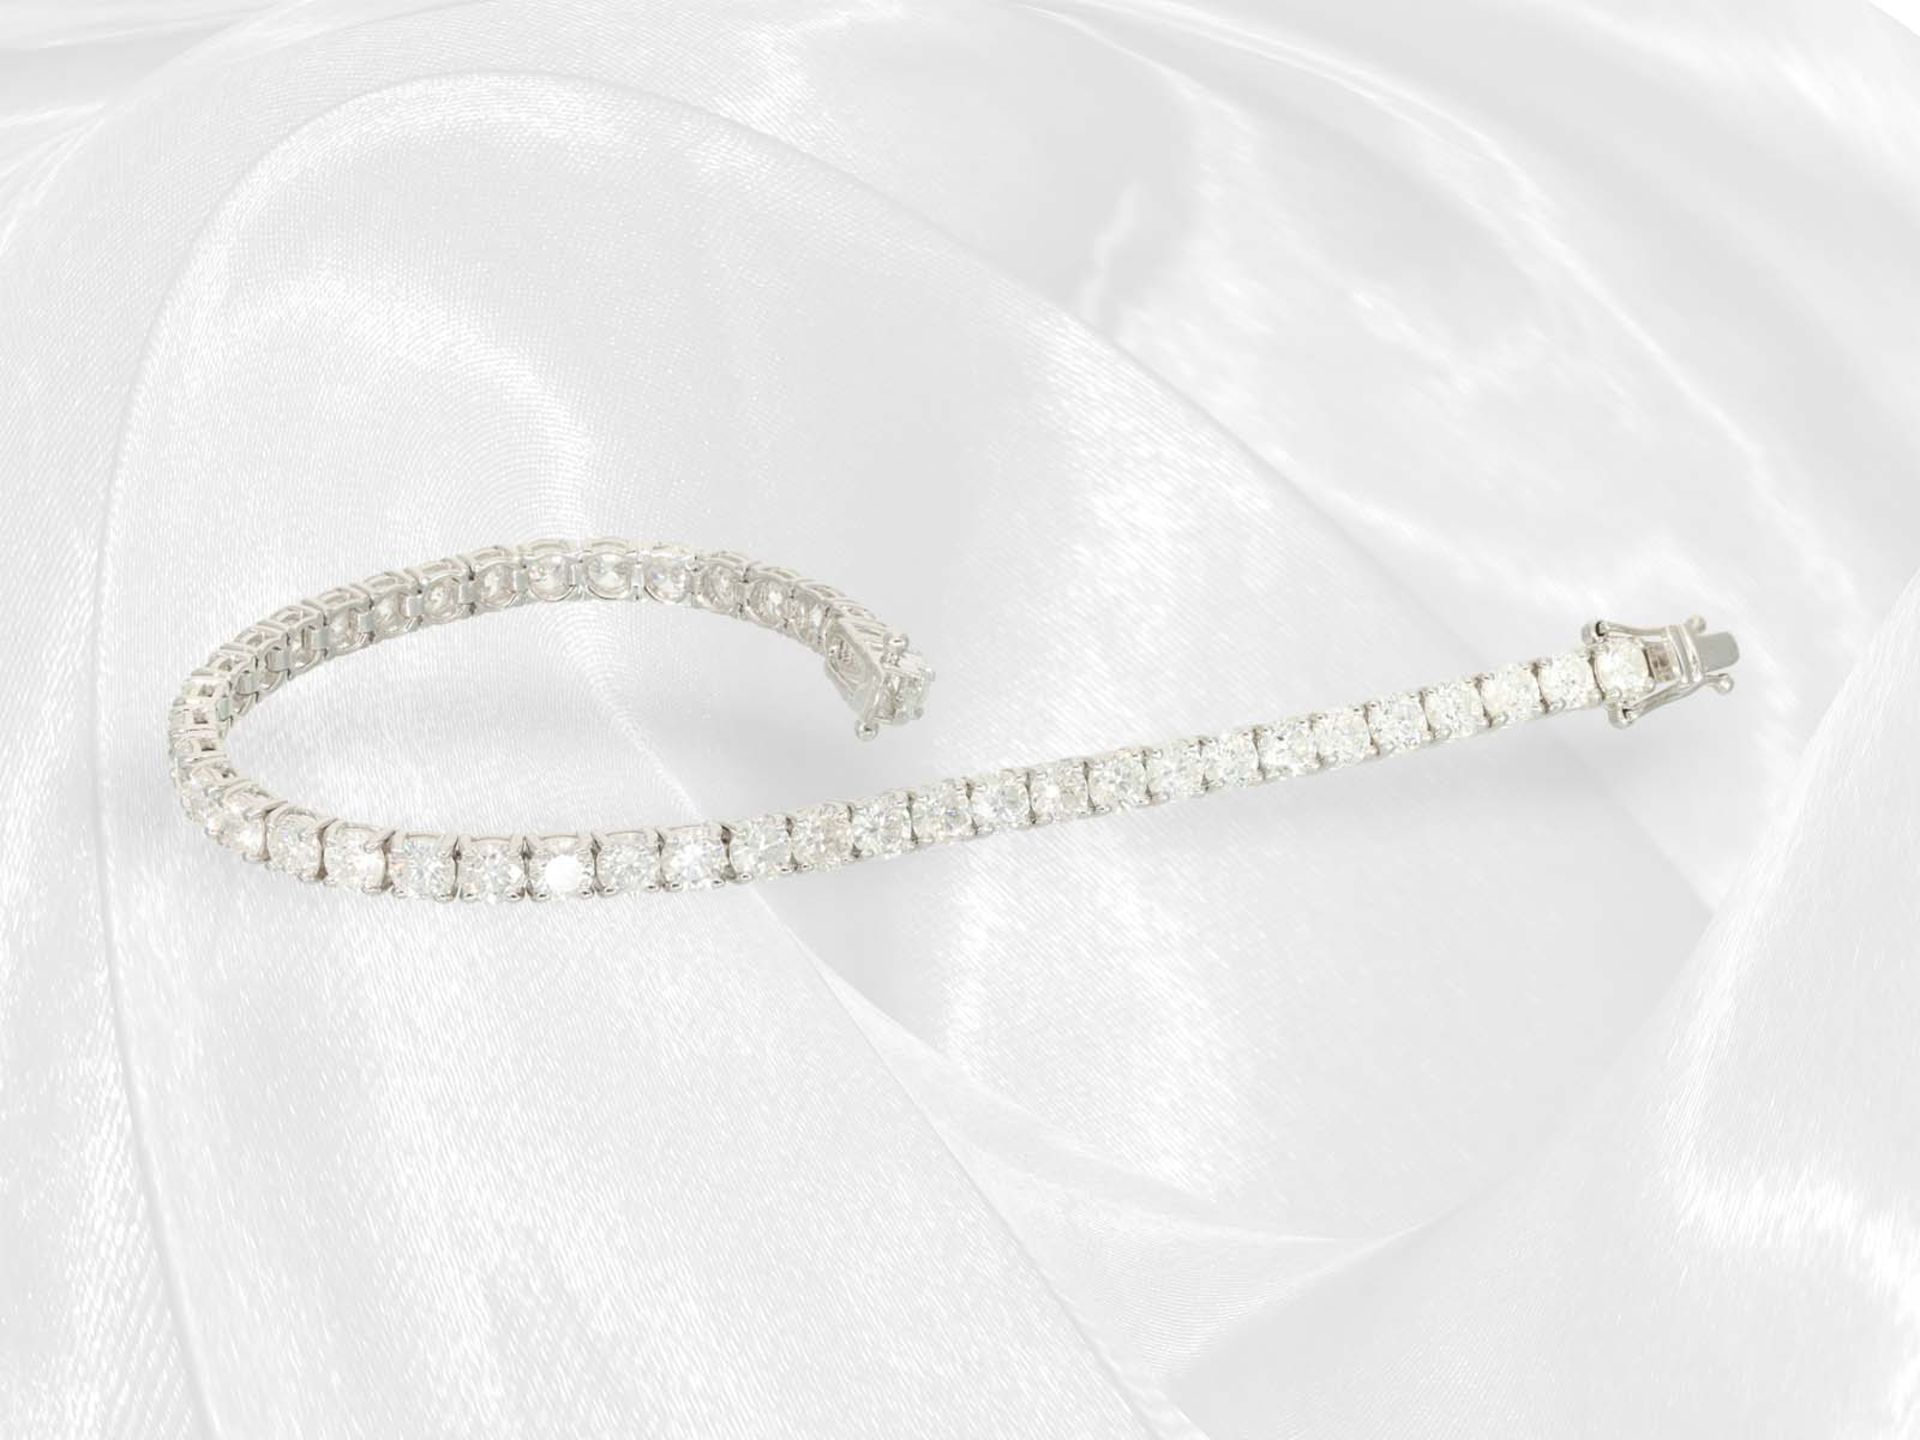 Bracelet: modern tennis bracelet with exceptionally large brilliant-cut diamonds, approx. 10.5ct - Image 5 of 5